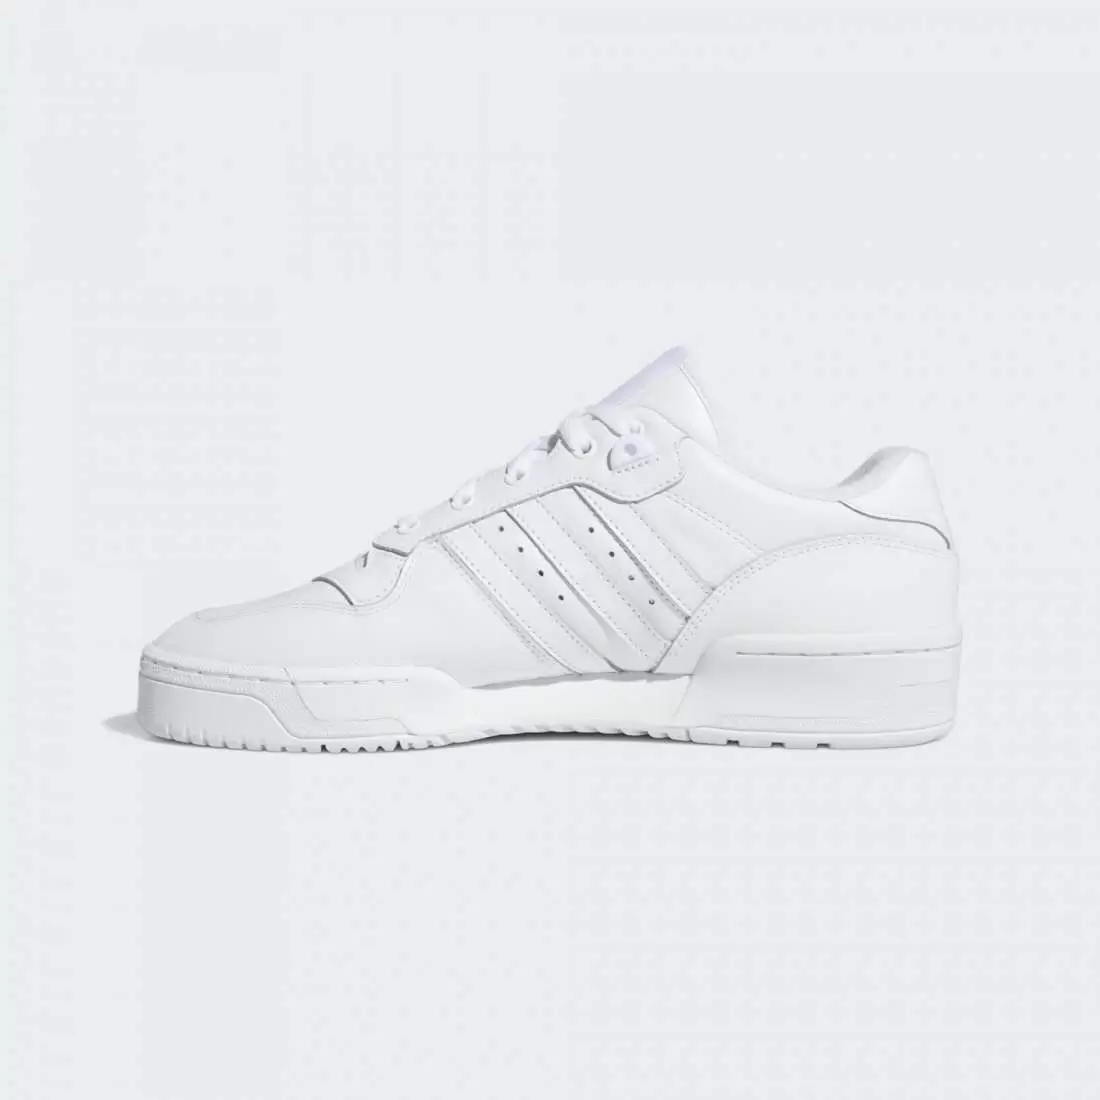 ADIDAS RIVALRY LOW CLDWHT/CLDWHT/CORBLK